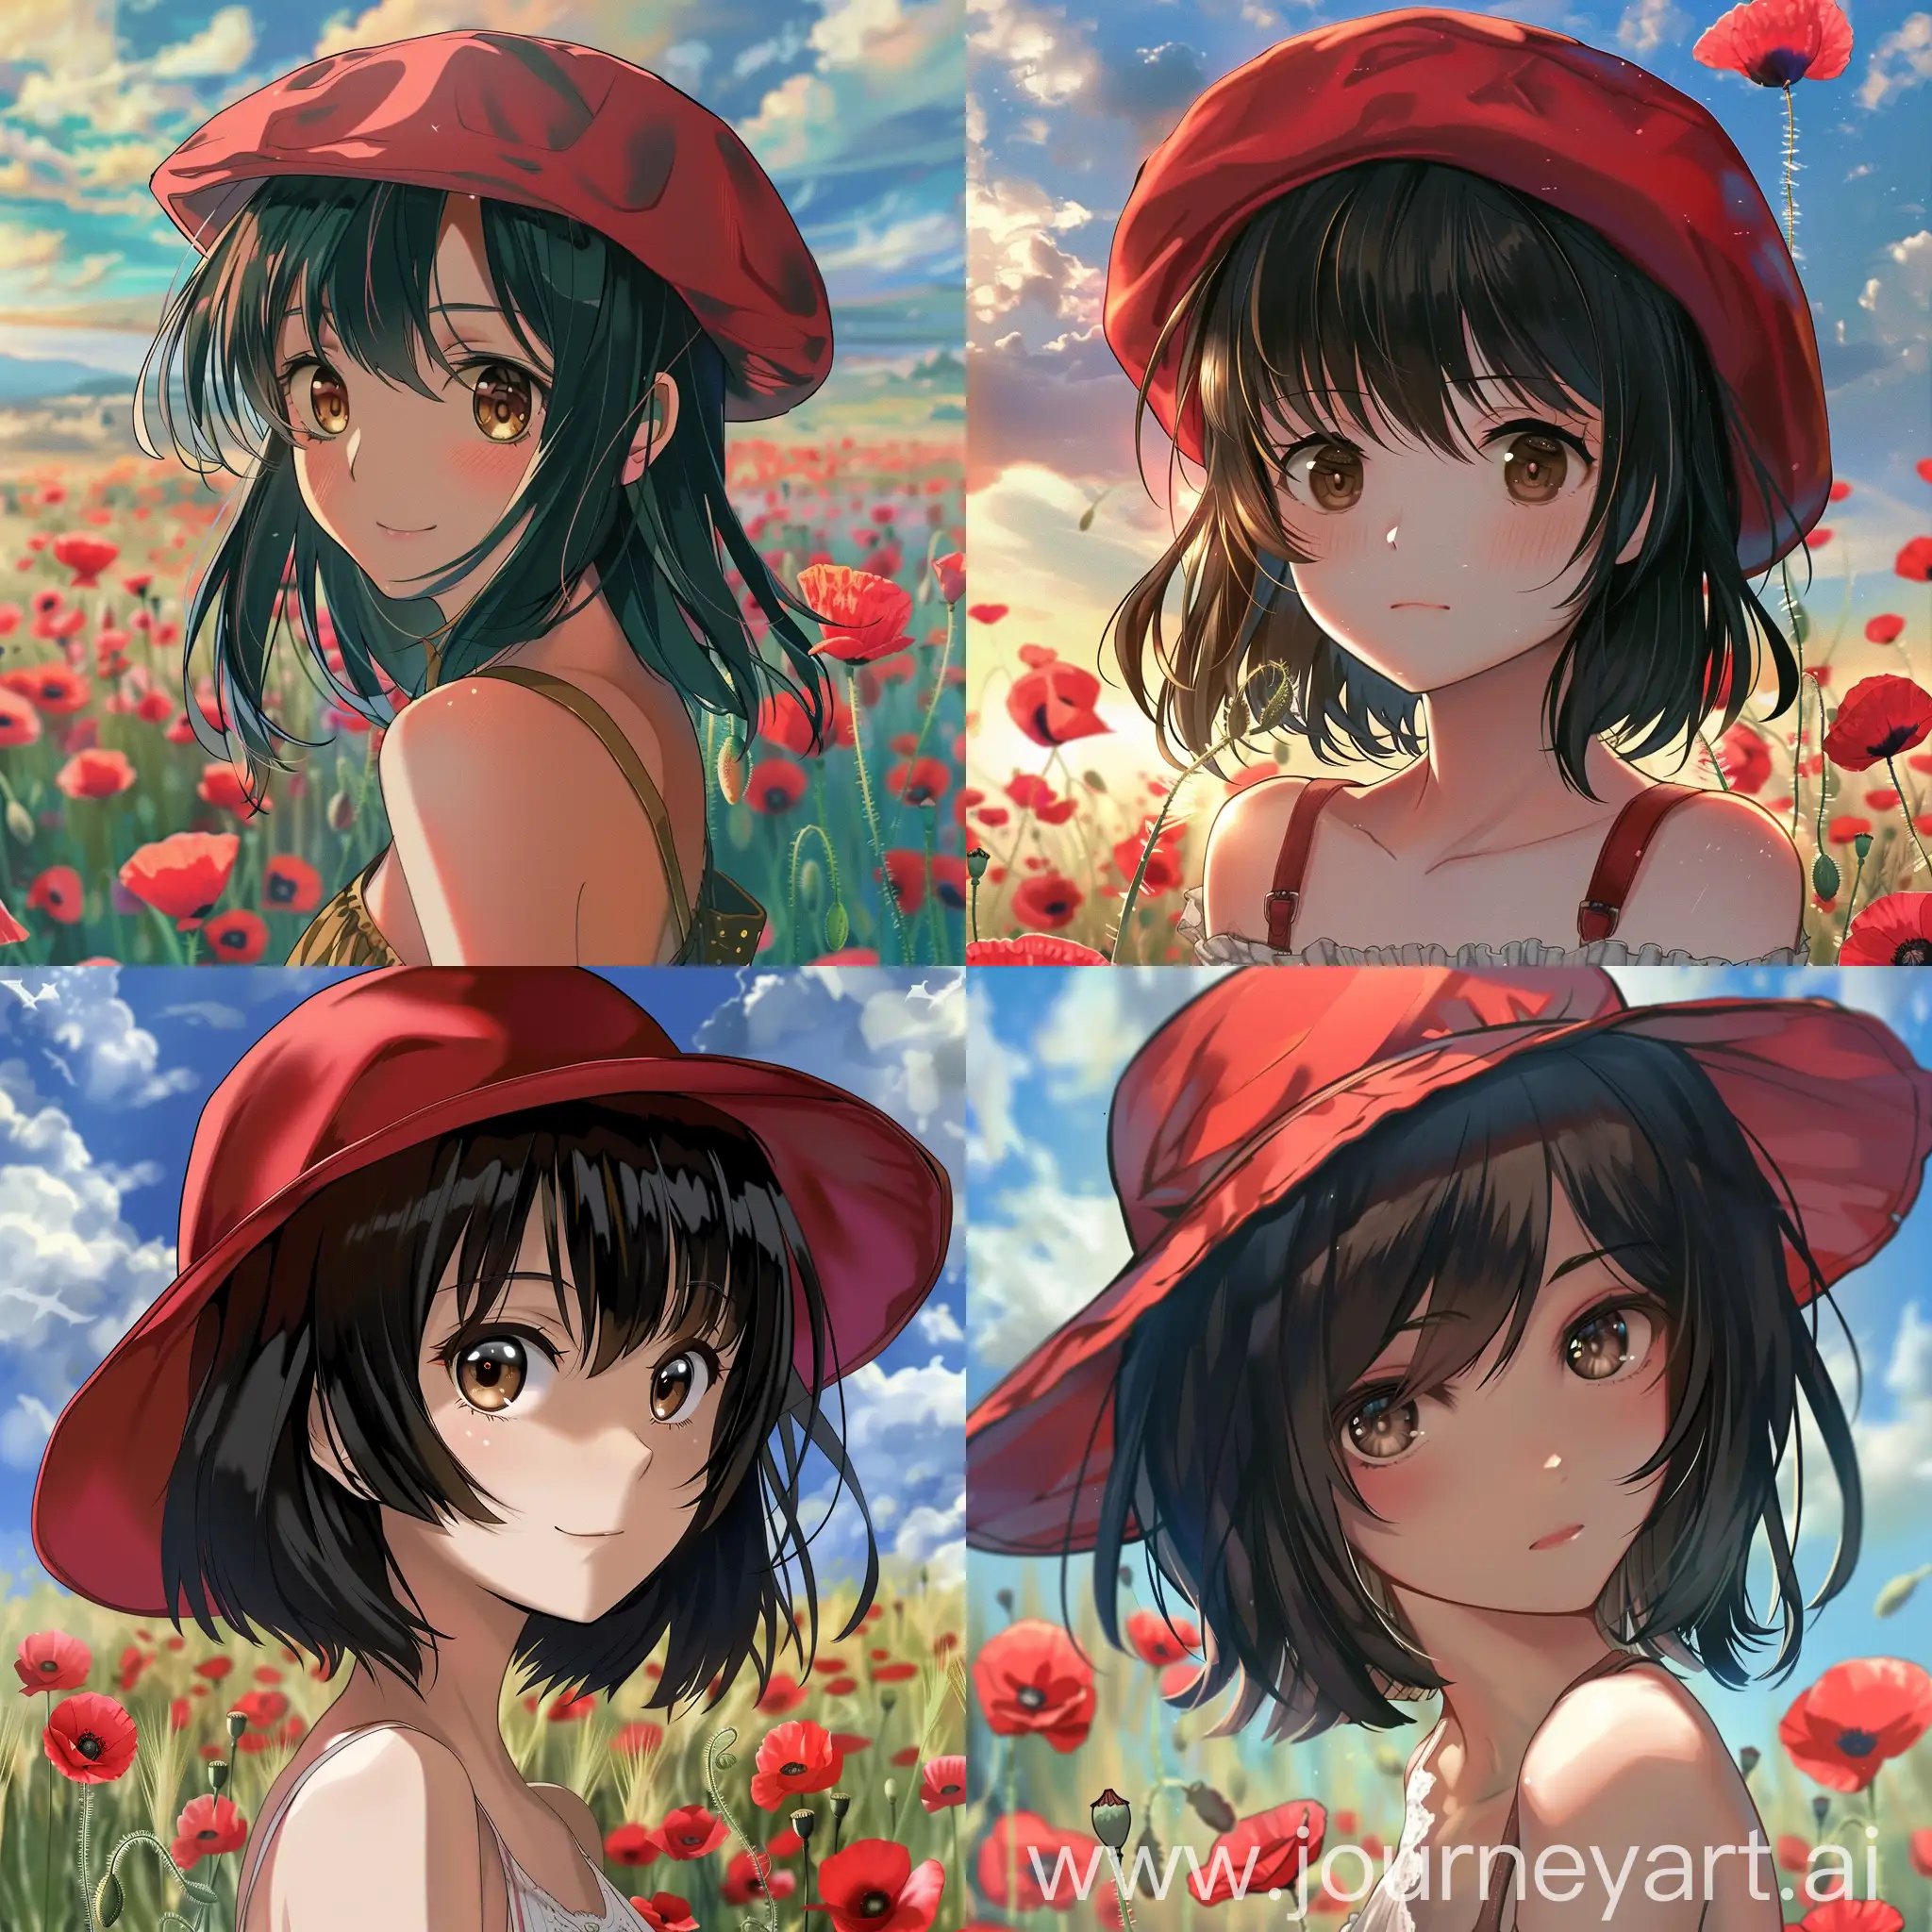 Anime-Girl-in-Red-Hat-Amidst-Poppy-Field-Serenity